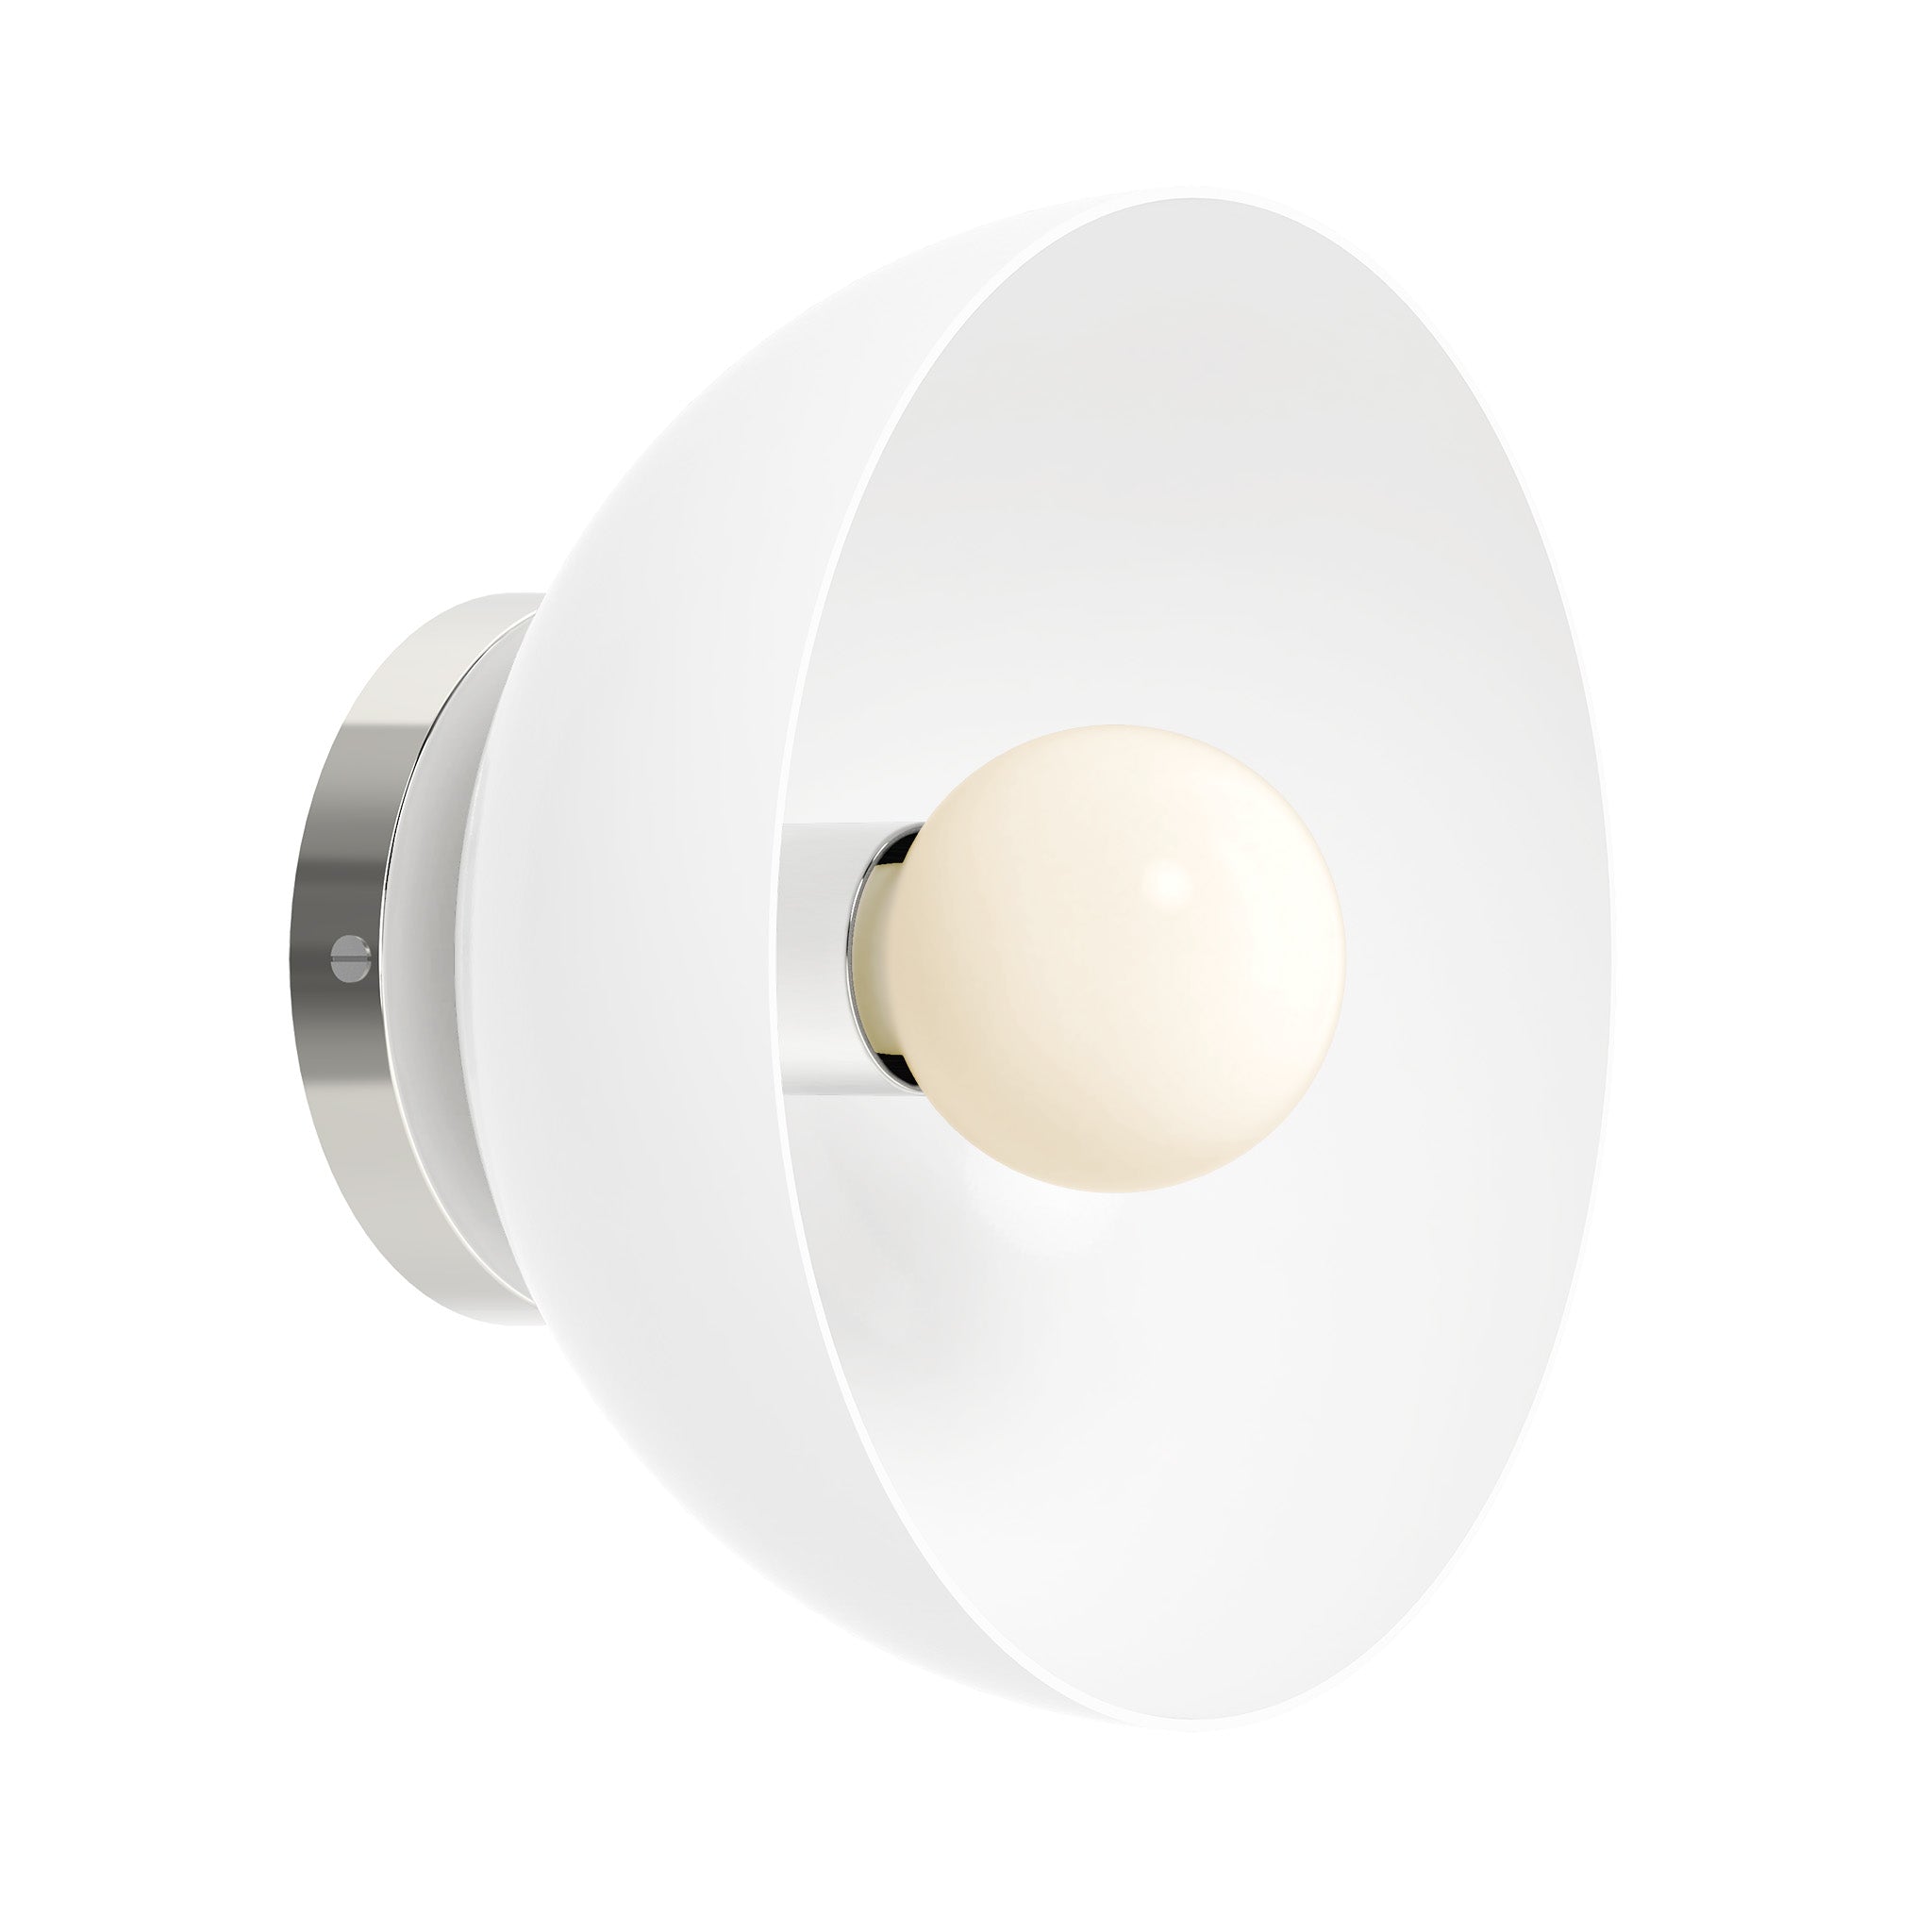 Nickel and white color hemi dome sconce 10" Dutton Brown lighting